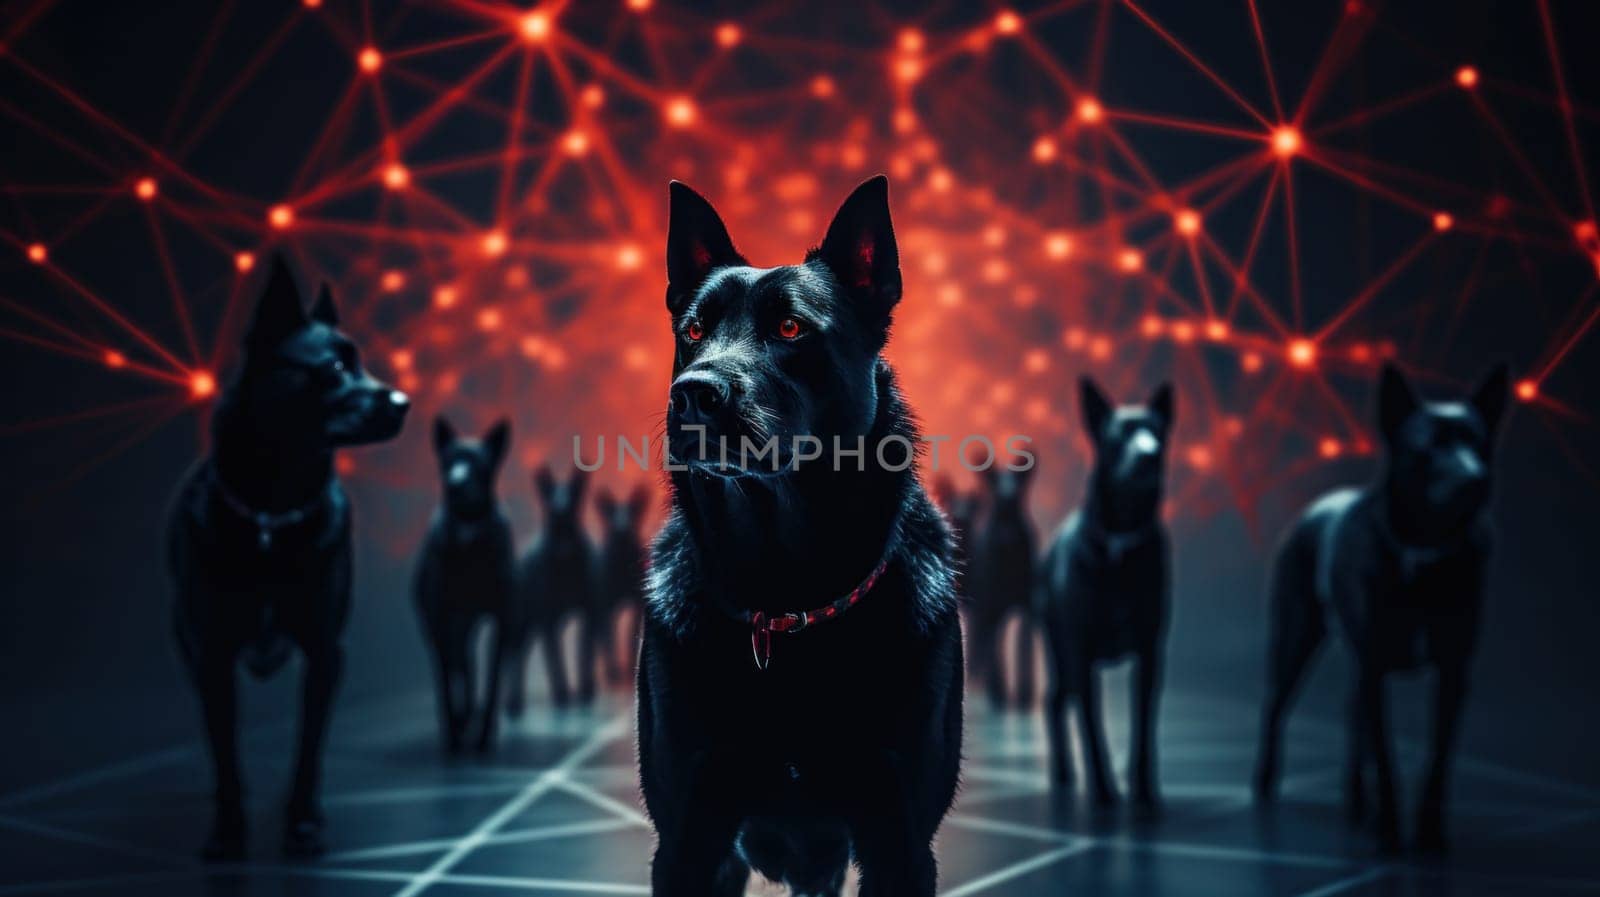 A group of dogs with glowing eyes and red lights around them